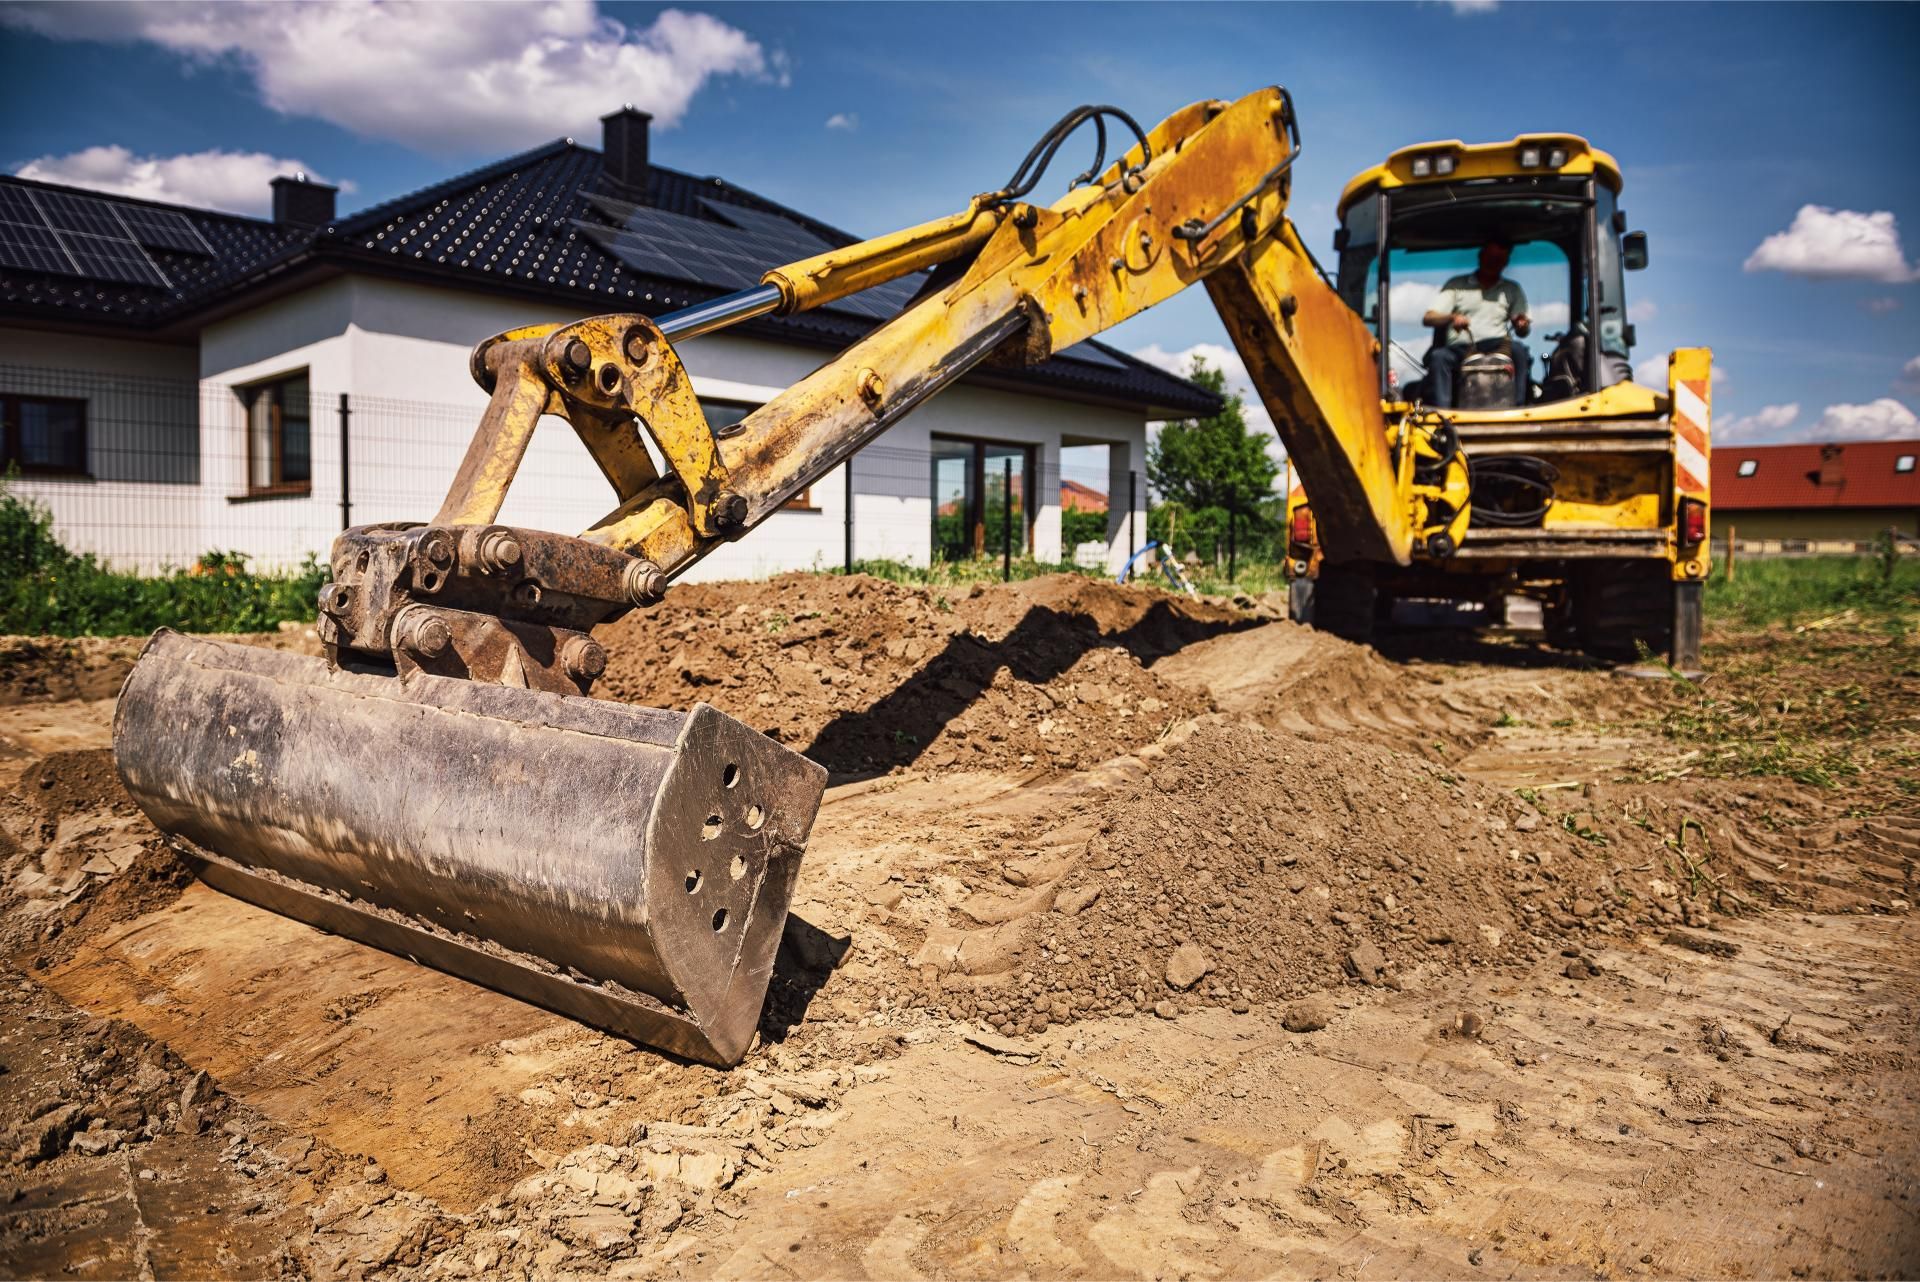 A yellow excavator is digging a hole in a dirt field in front of a house.